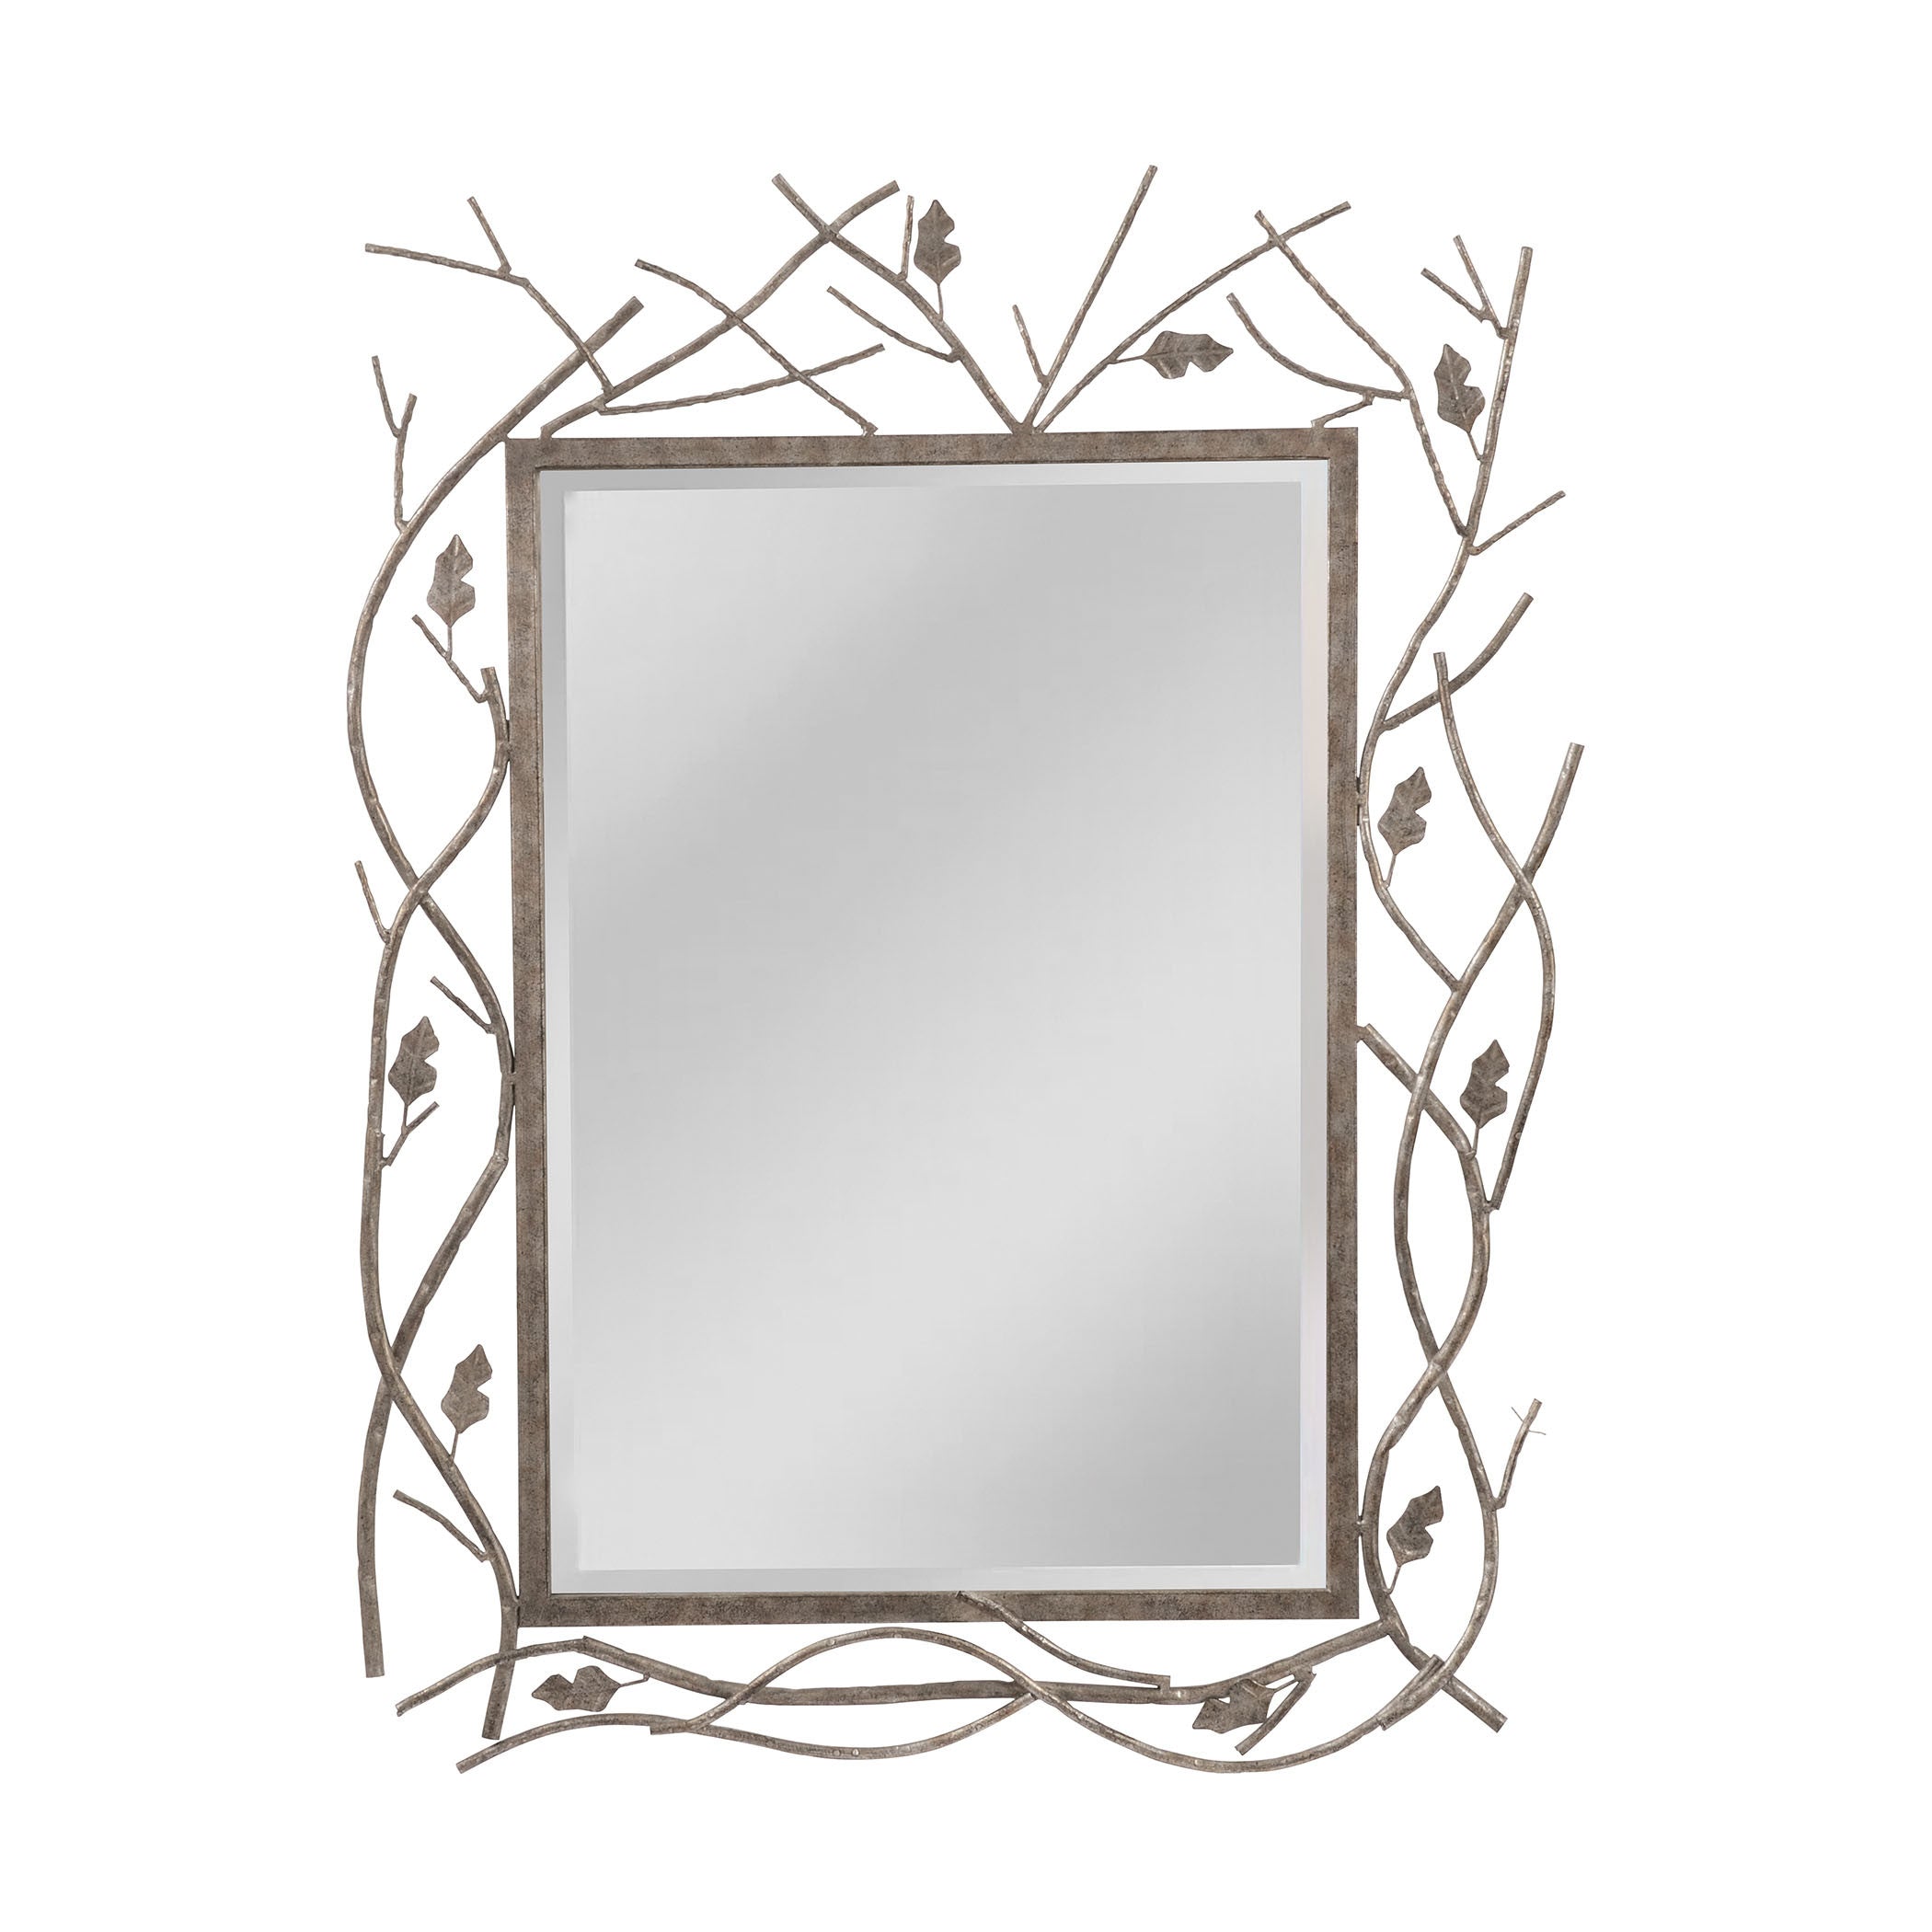 Mirror Masters Mm3772-0016 Twig & Leaf Collection Aztec Silver Finish Wall Mirror